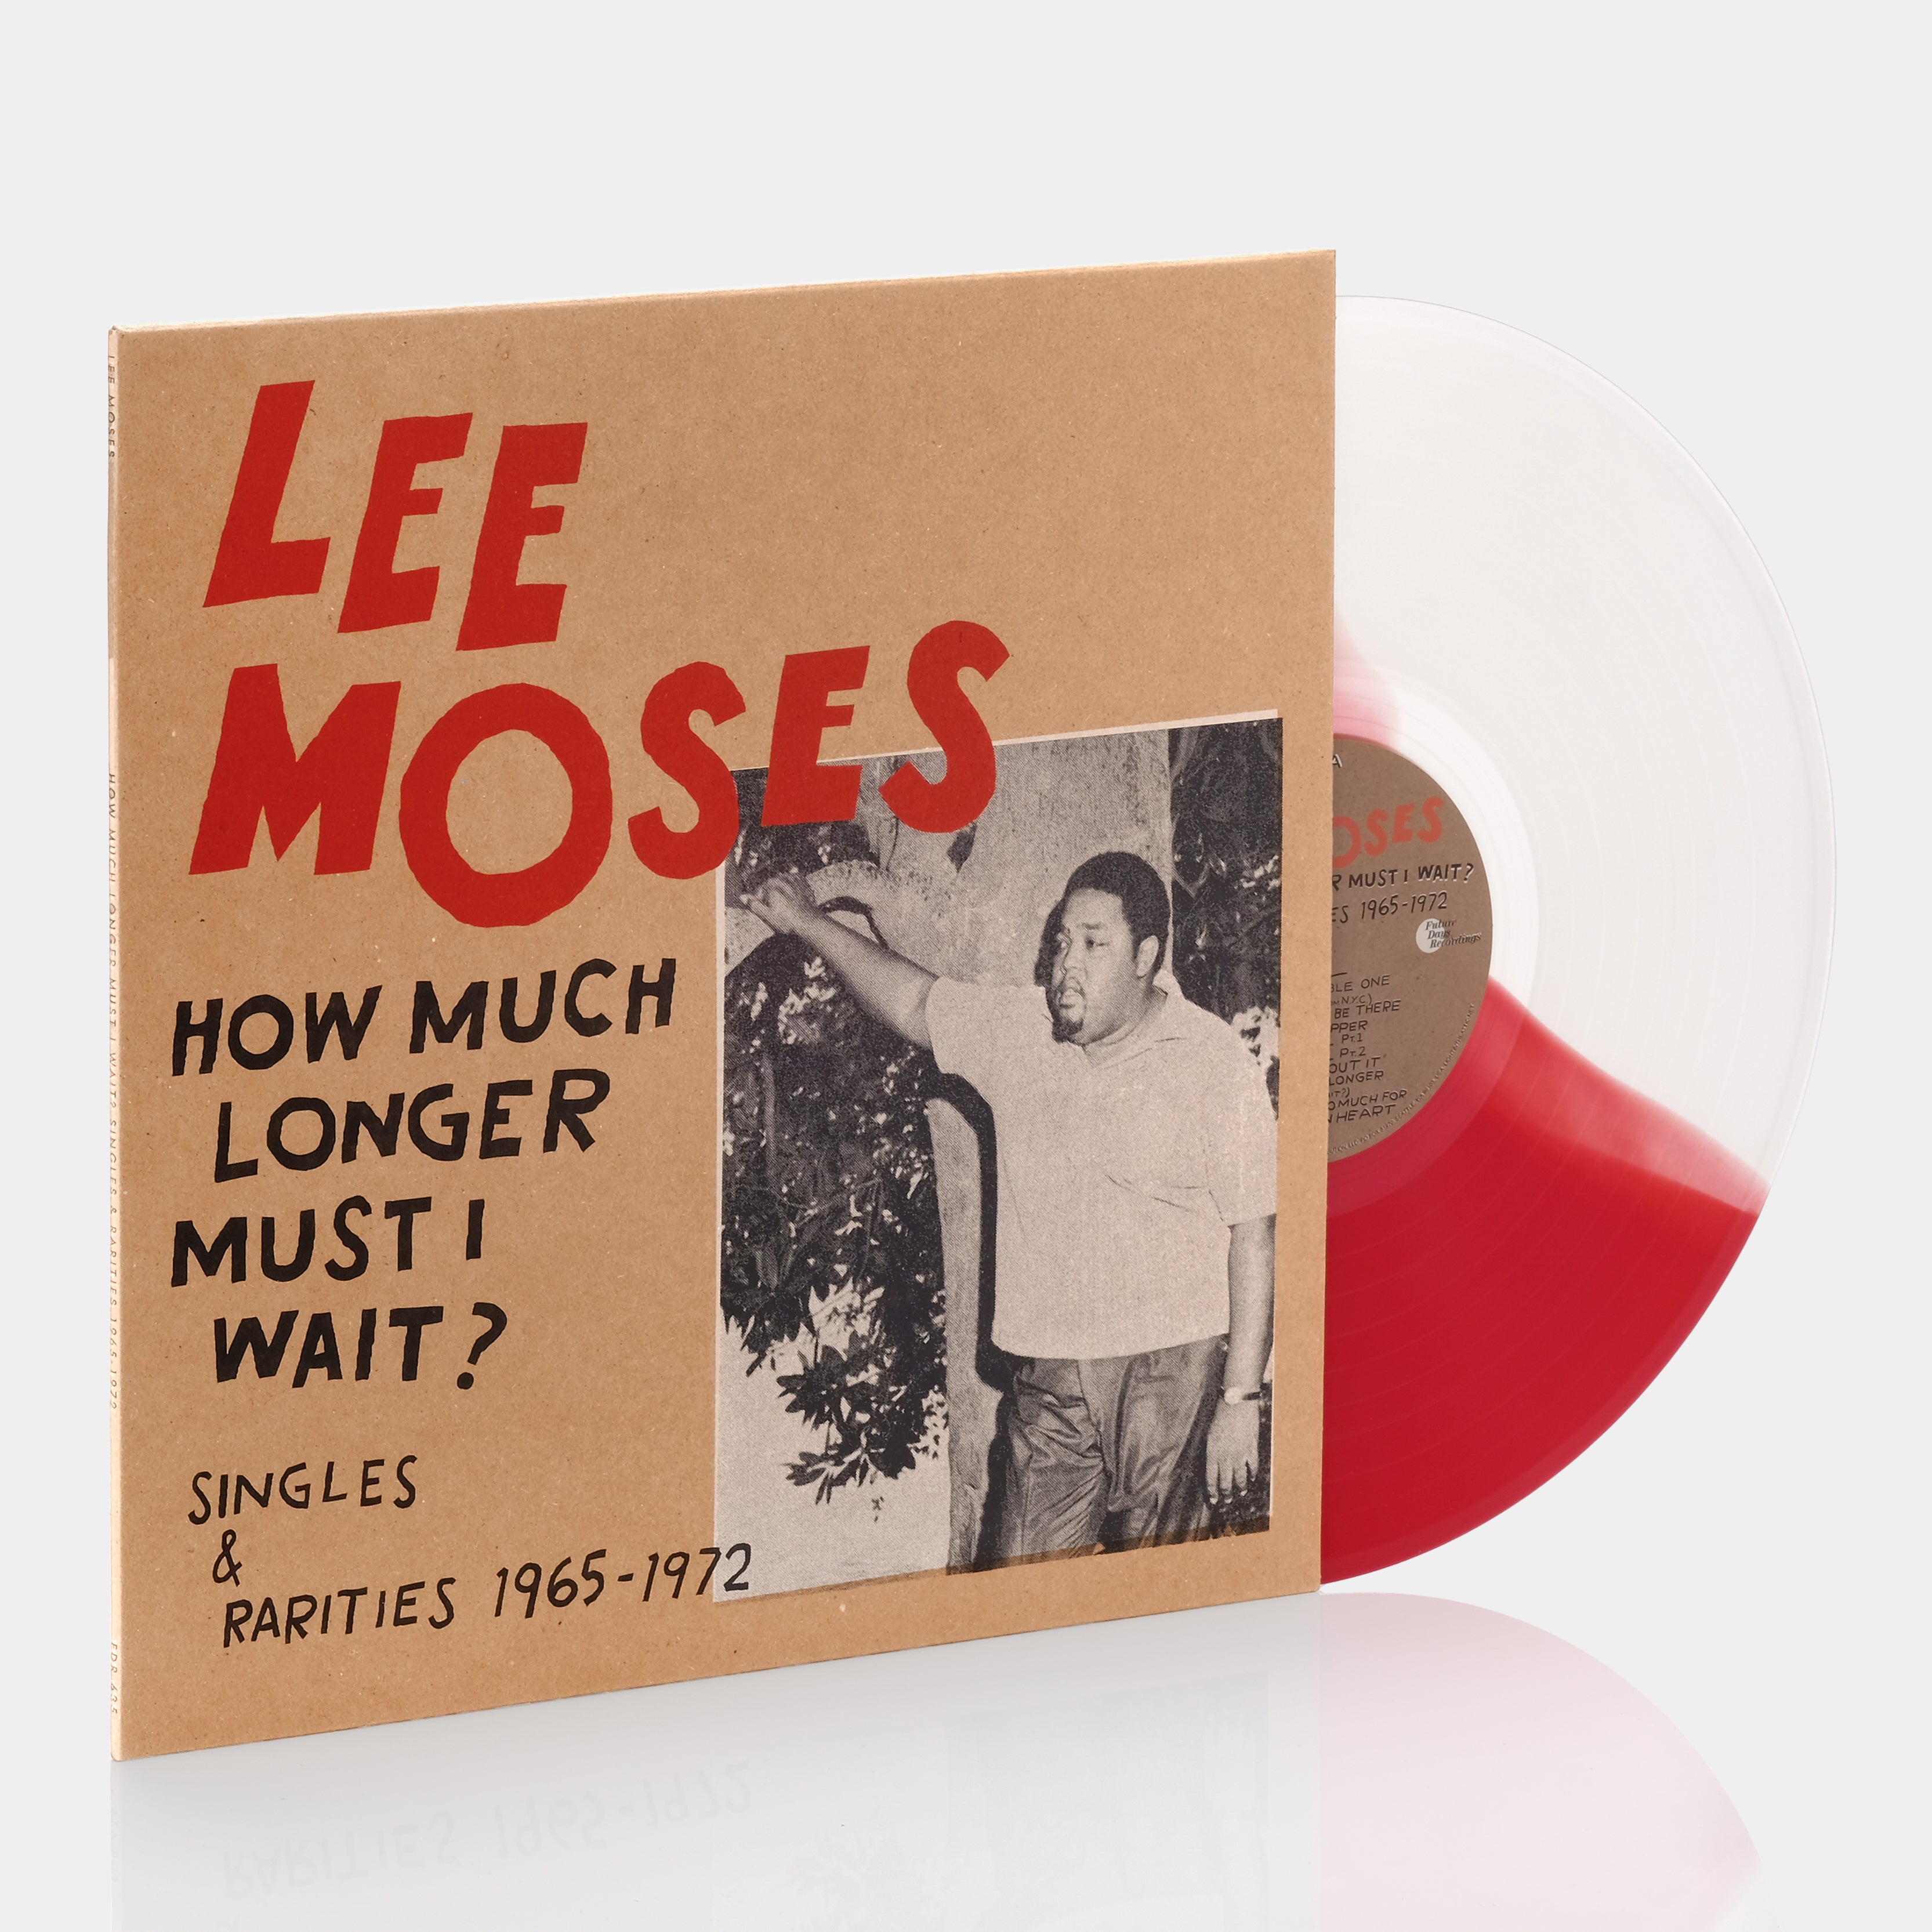 Lee Moses - How Much Longer Must I Wait? Singles & Rarities 1965-1972 LP Day Trippin' Split Colored Vinyl Record